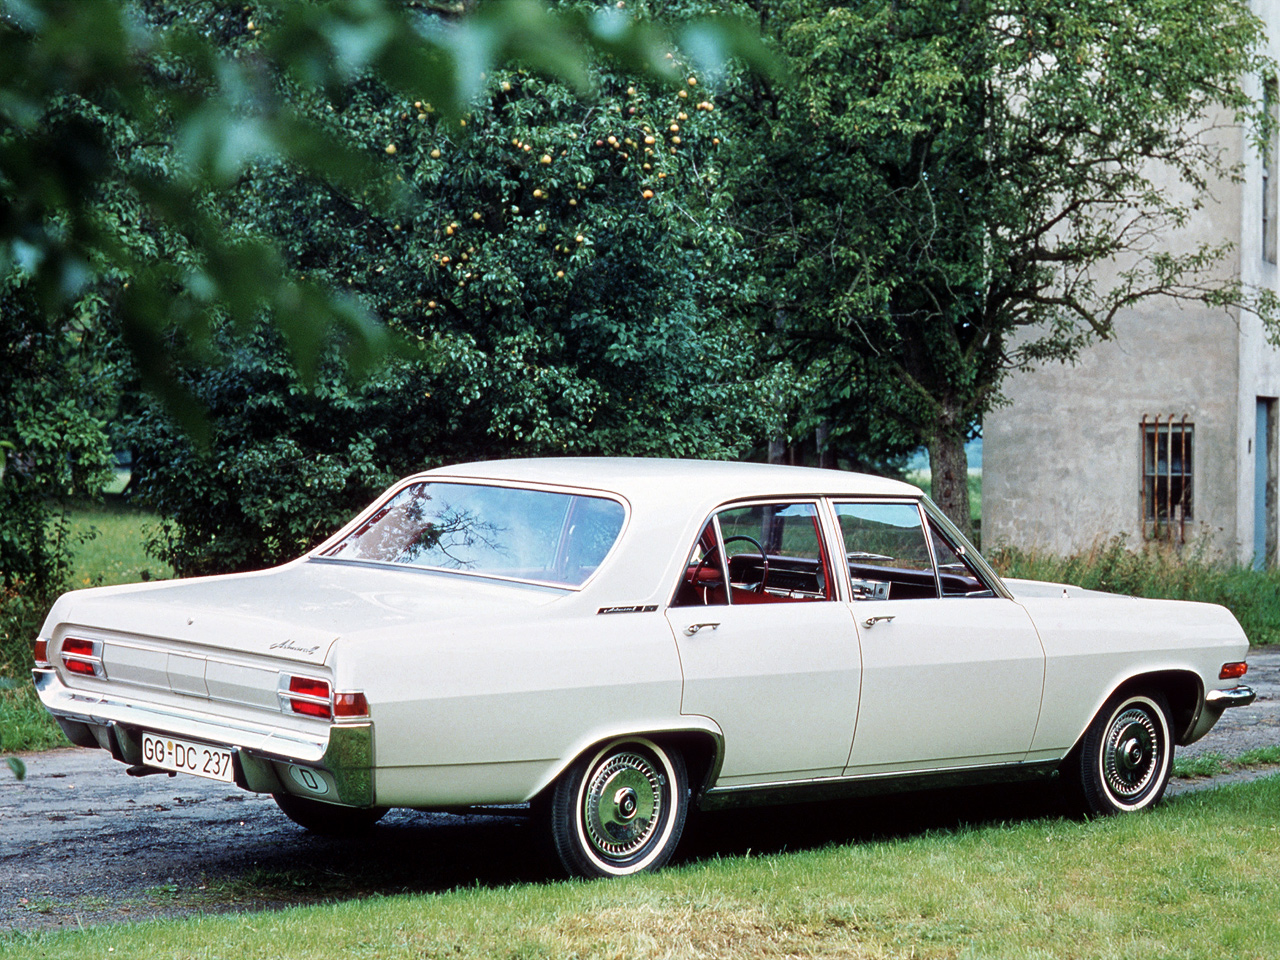 You can vote for this Opel Admiral photo